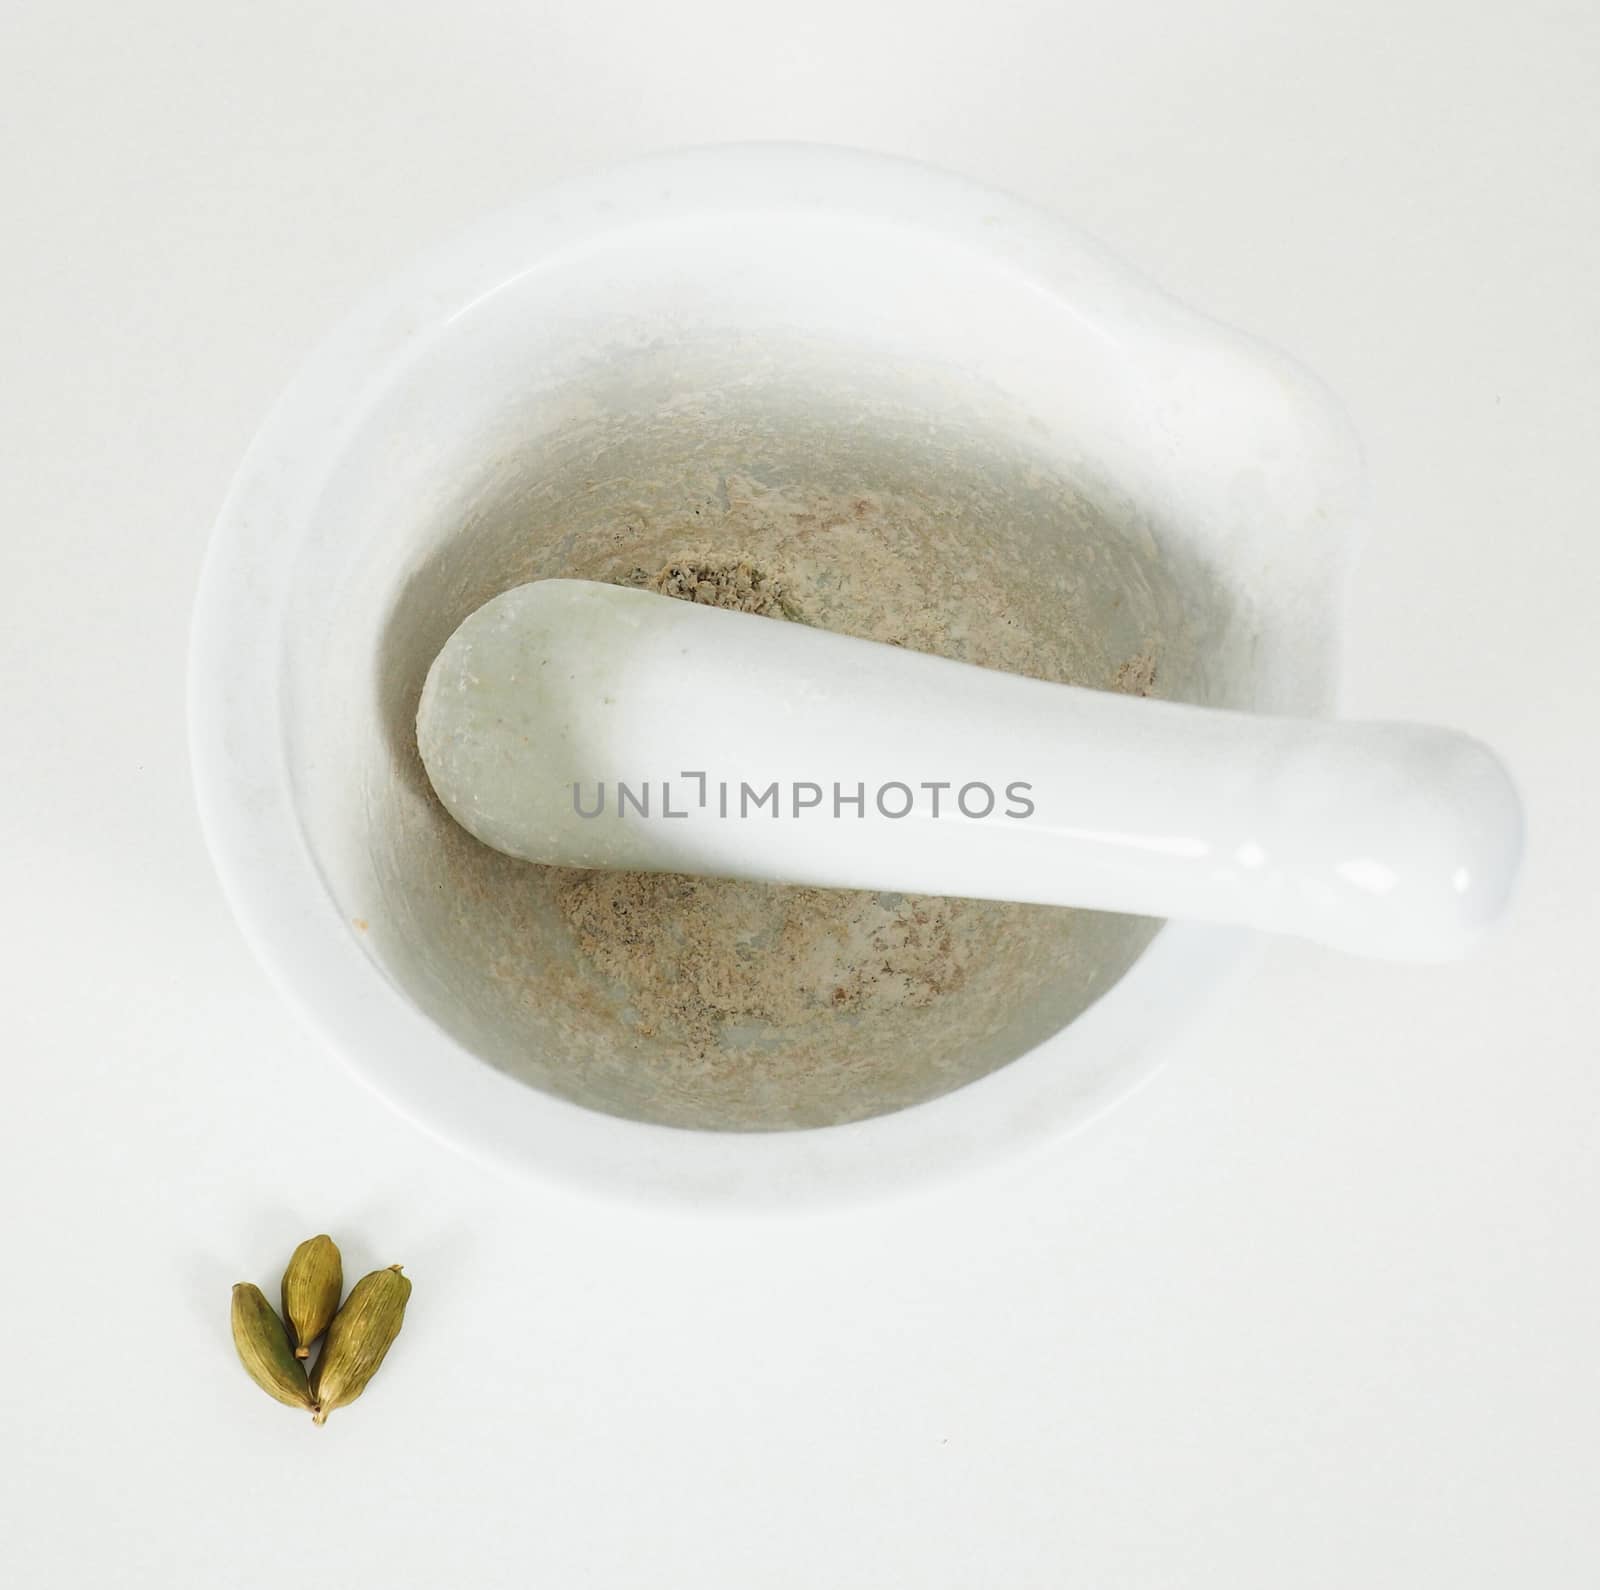 White marble mortar with whole cardamom on the side by Arvebettum